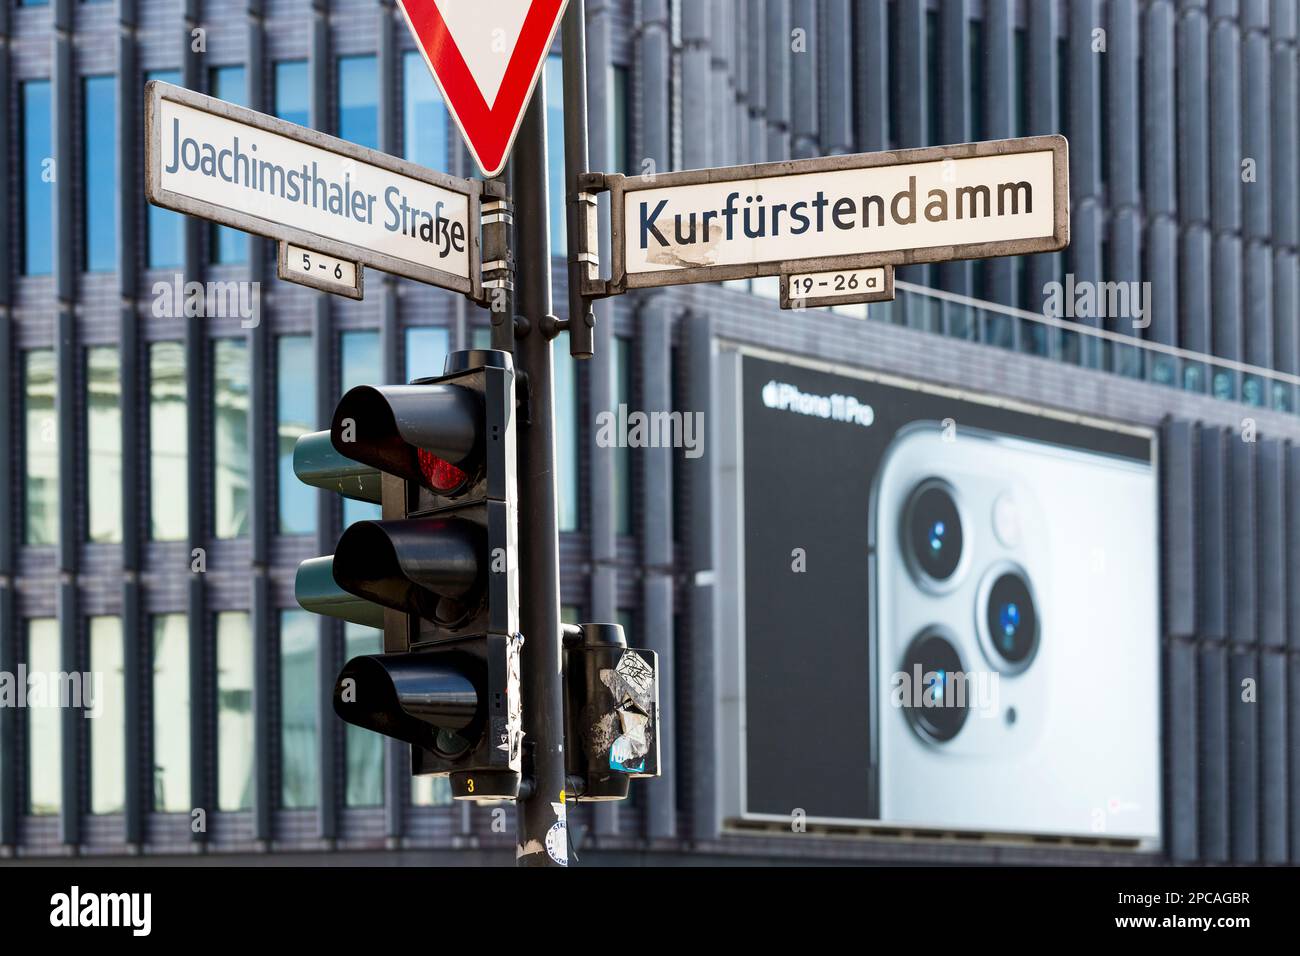 Berlin, Germany 10-7-2019 St sign of the Kurfürstendamm, one of the most famous avenues in the city, aka known as Ku'damm. Stock Photo